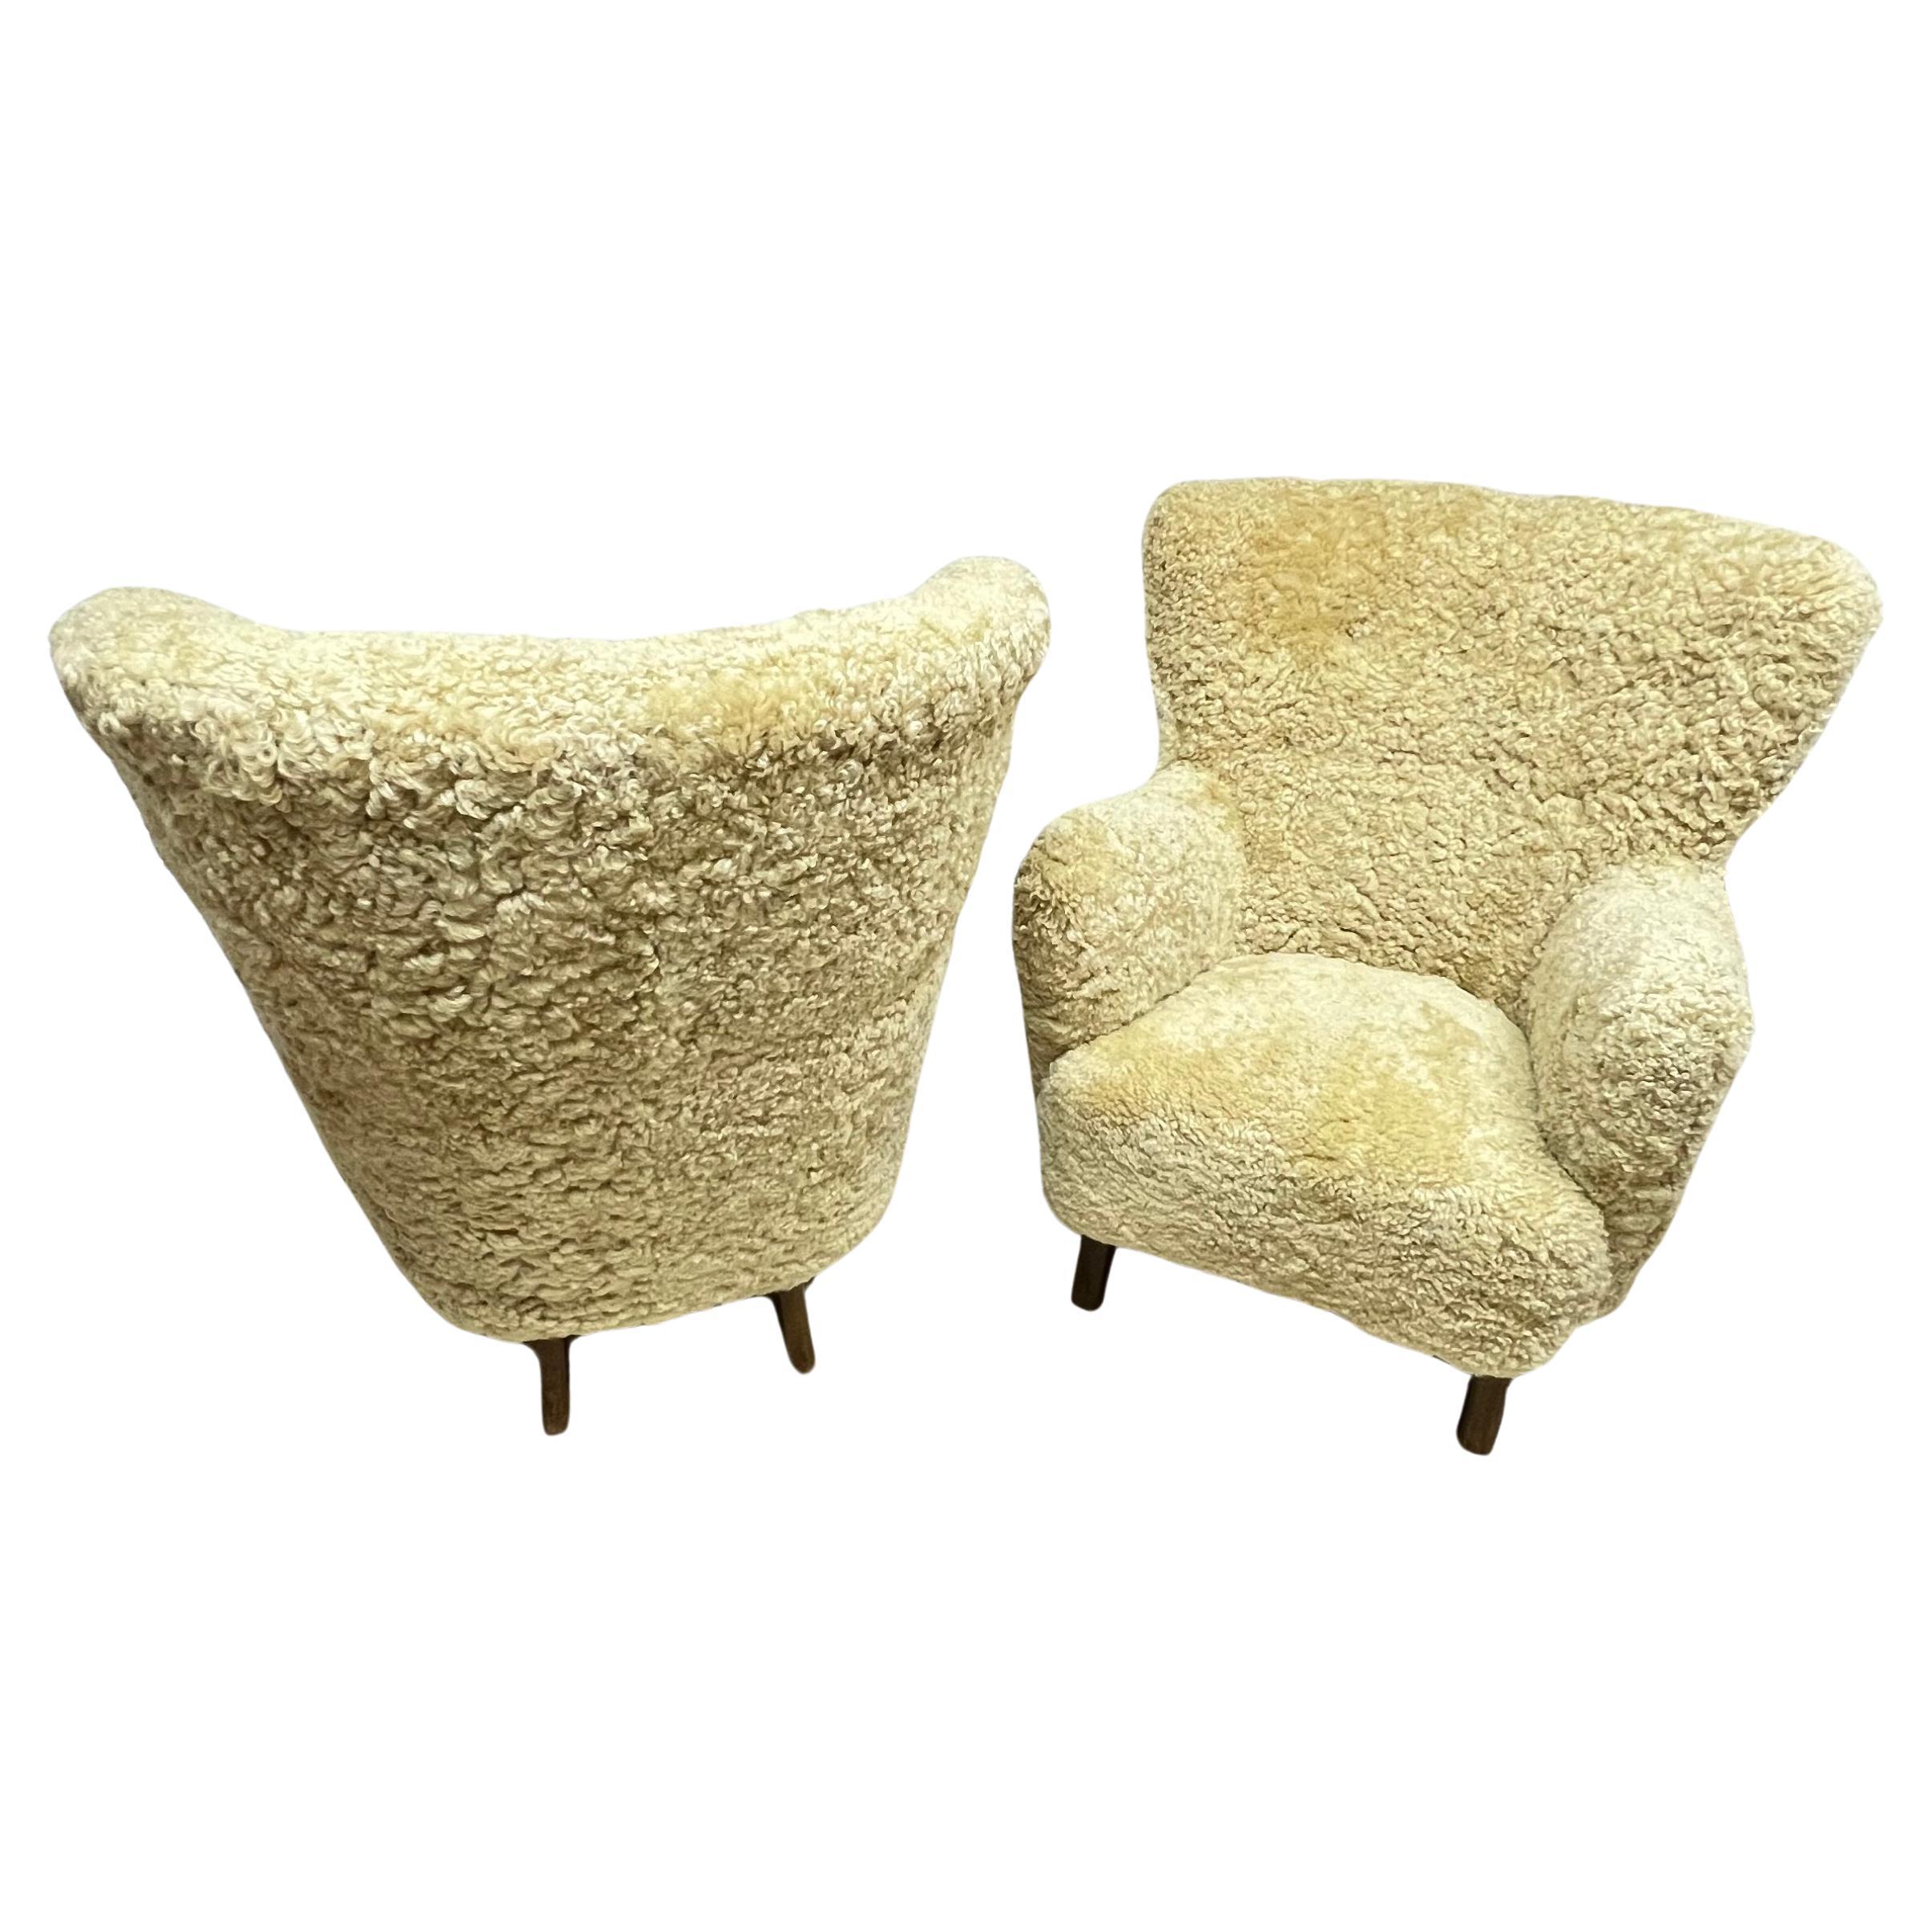 Pair of Shearling Chairs by Alfred Christensen, Denmark circa 1950 For Sale